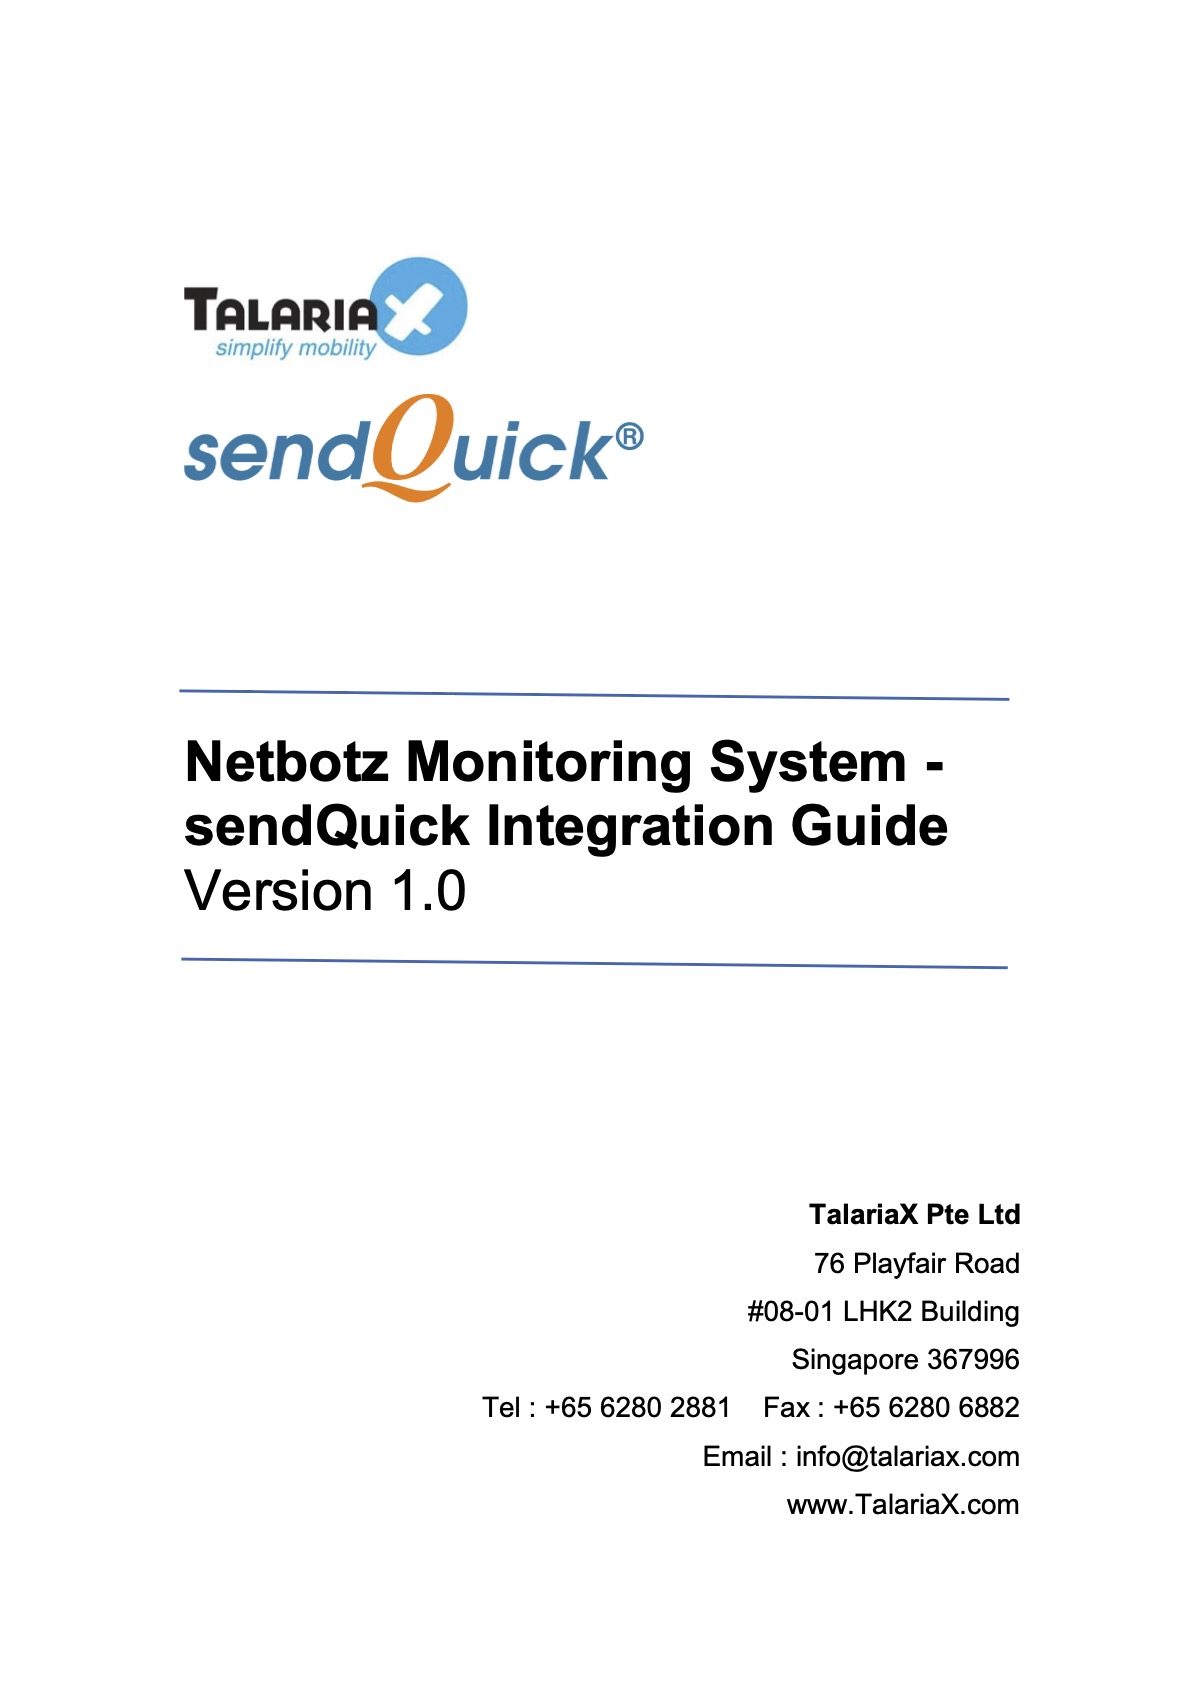 You are currently viewing Netbotz Monitoring System and sendQuick Integration Guide V1.0